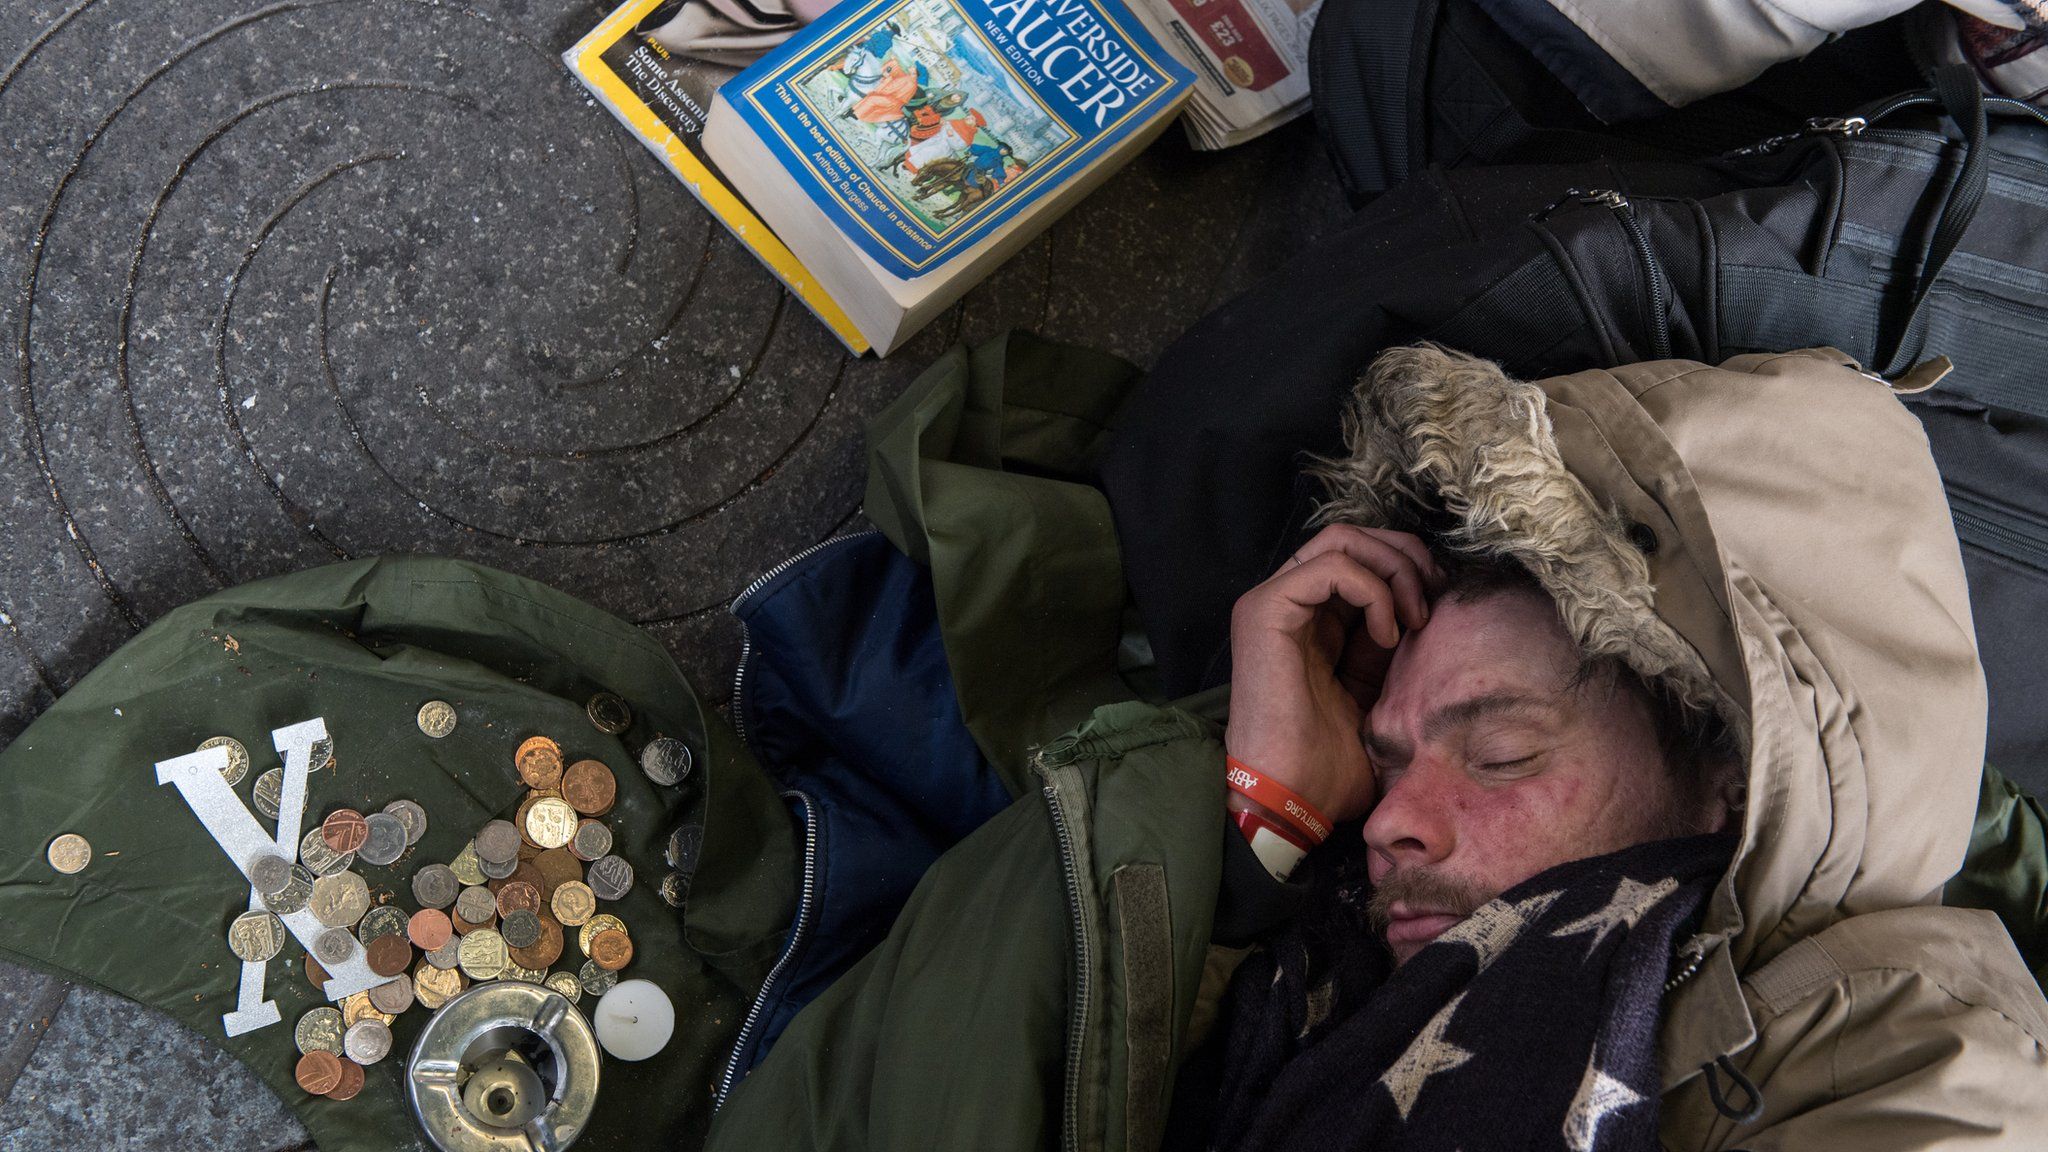 Homeless man sleeping by donations